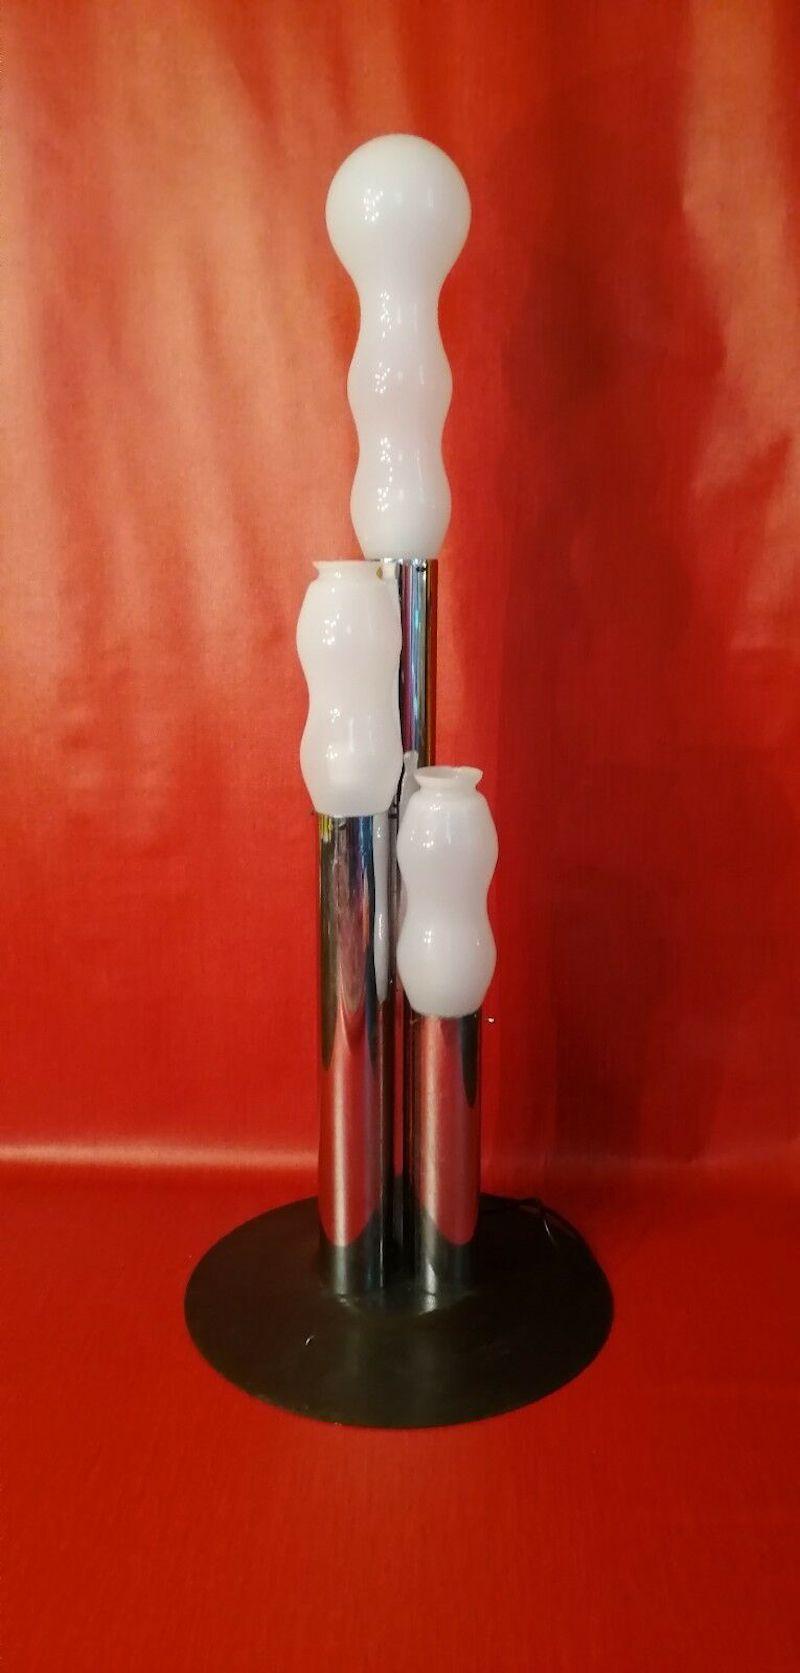 Original floor lamp from the 70s, made with a metal structure with a wide base and three mouth-blown opaline glass diffusers of different sizes and shapes

Exact measures on request

In very good condition, as shown in the photos, in perfect